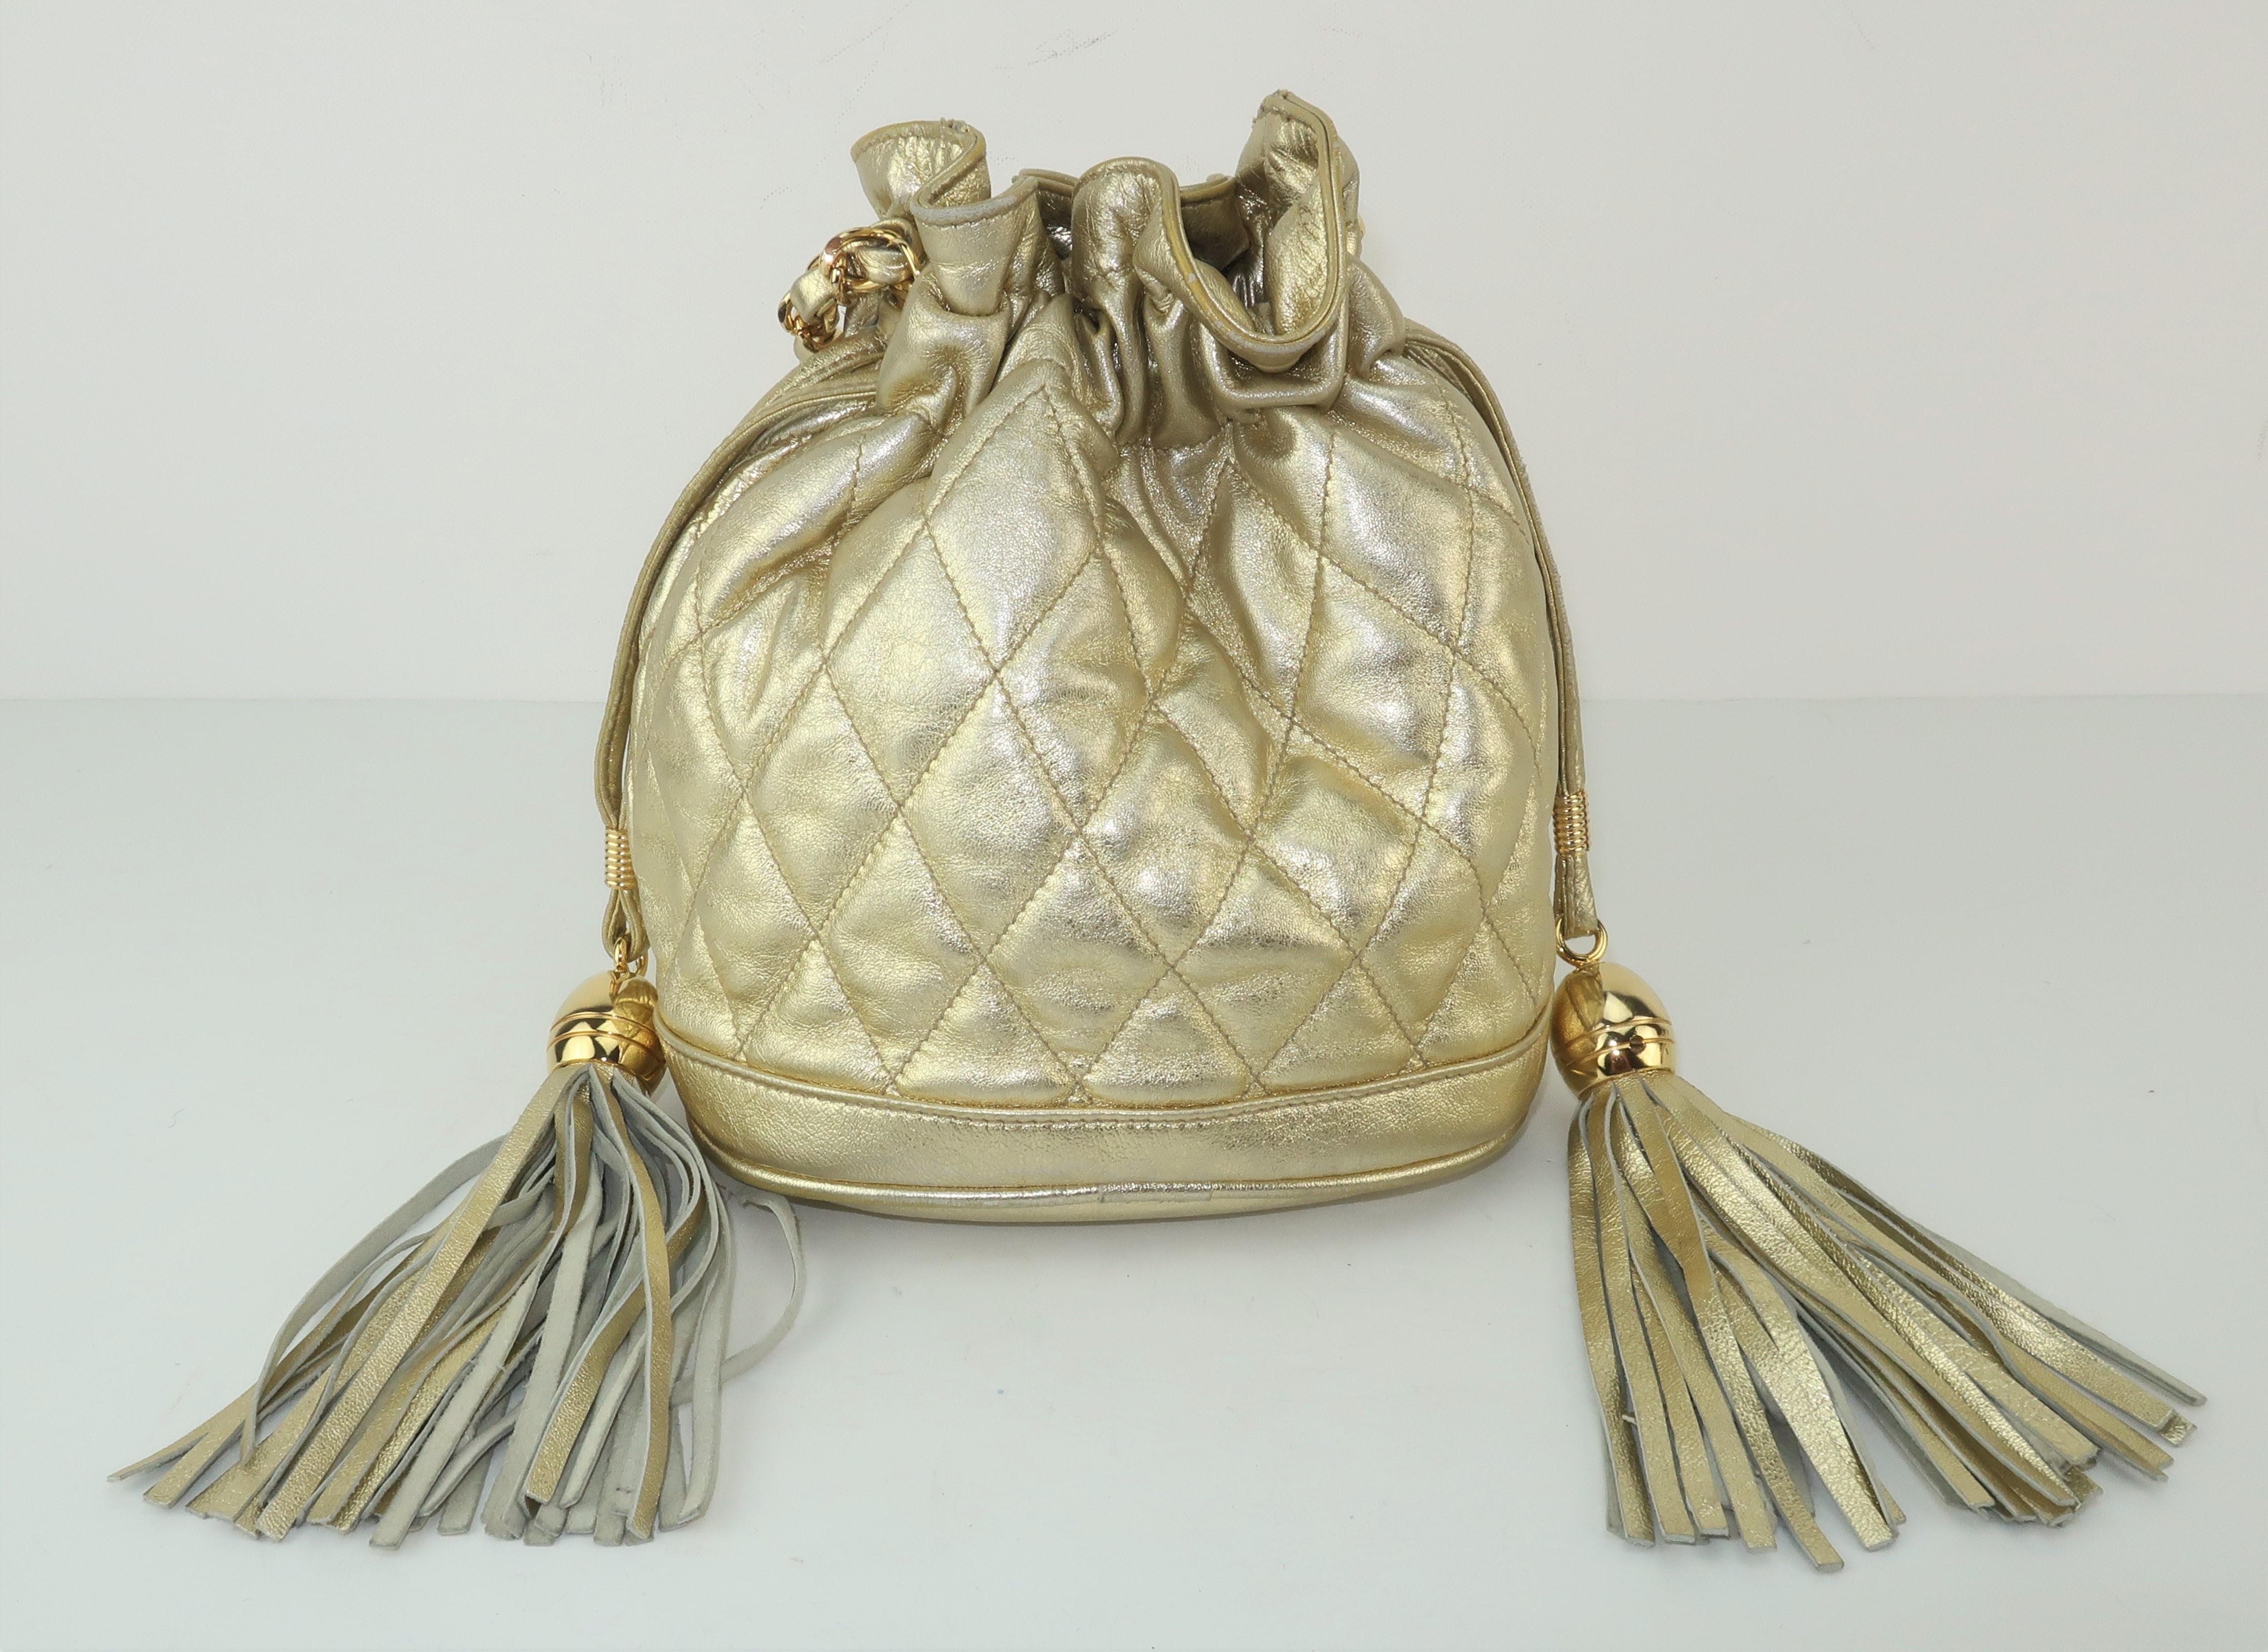 This youthful gold leather hobo handbag made for the Neiman Marcus Collection has quality details with a Chanel look.  The quilted handbag features a drawstring closure with large tassel accents and a chain shoulder strap braided with coordinating